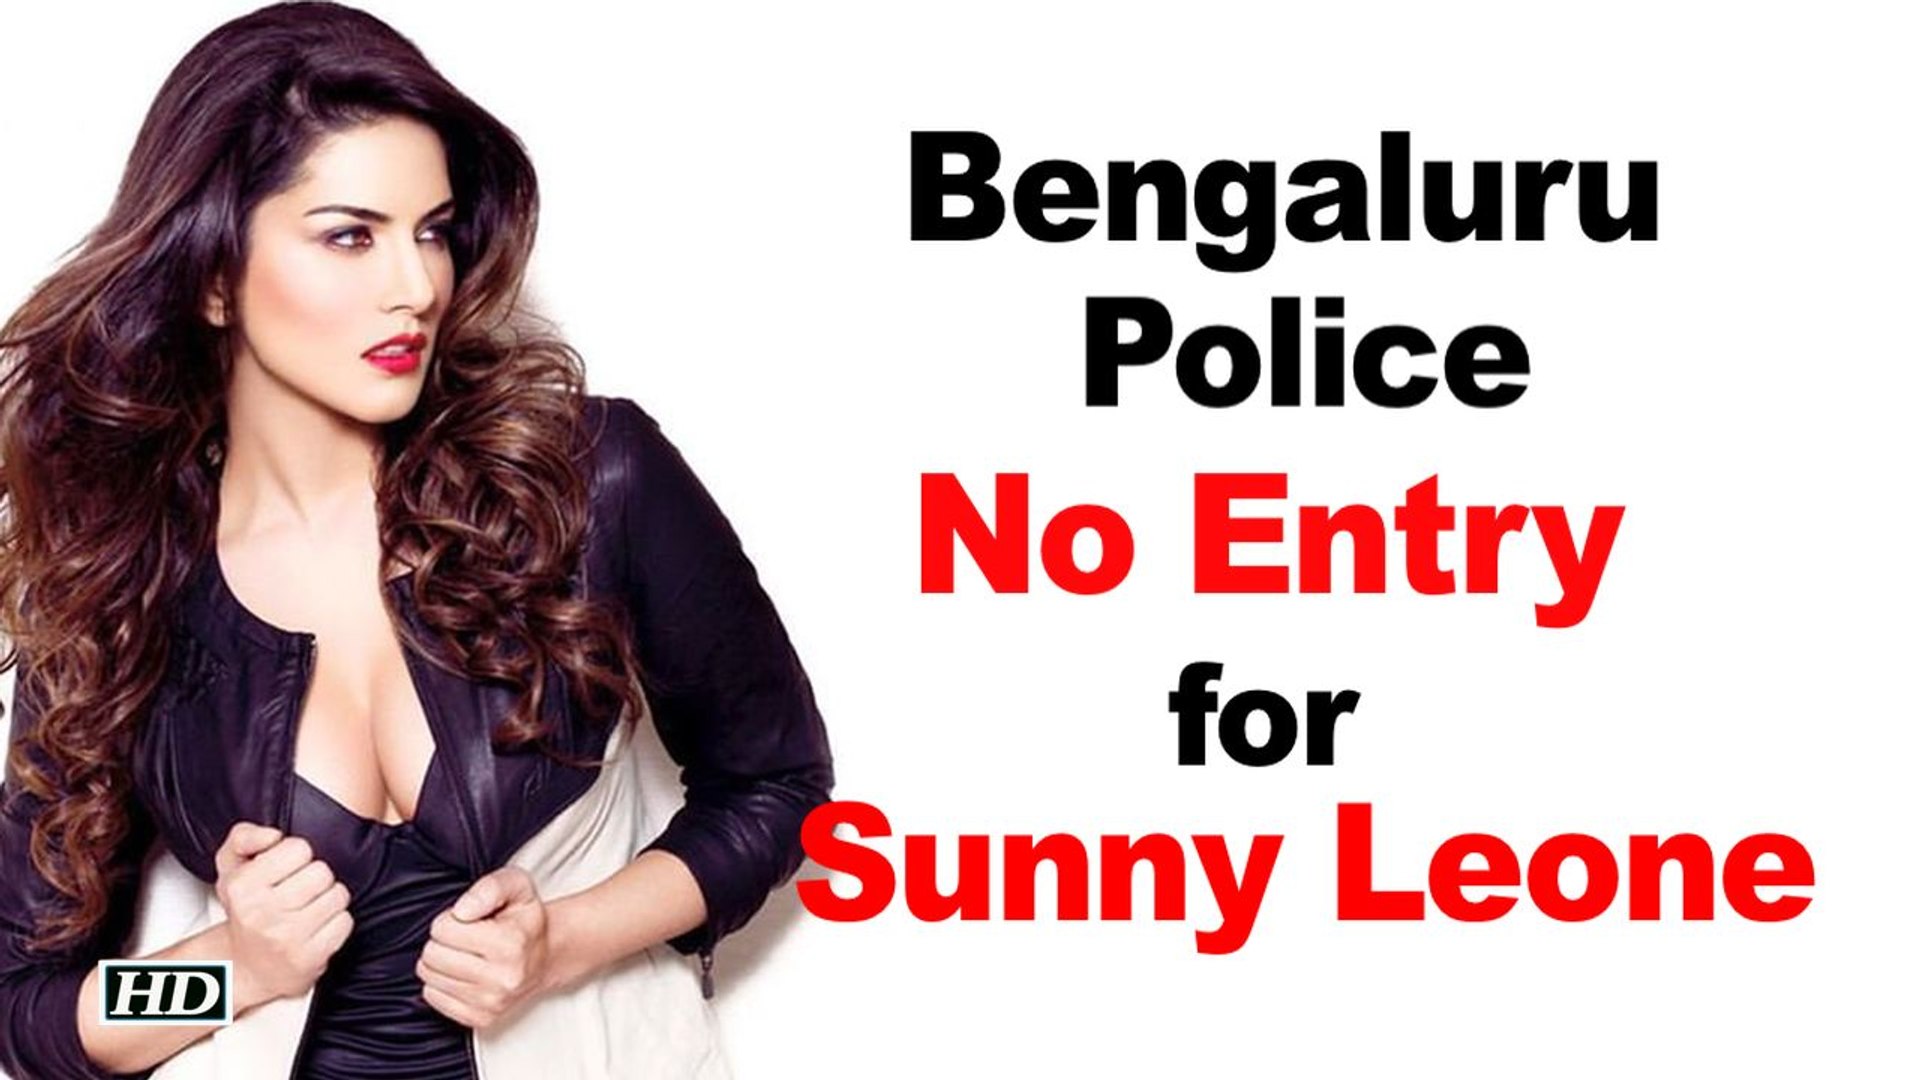 Sexy Sunny Leone Singapore Pte - Bengaluru Police: No Entry for Sunny Leone on New Year bash - video  Dailymotion